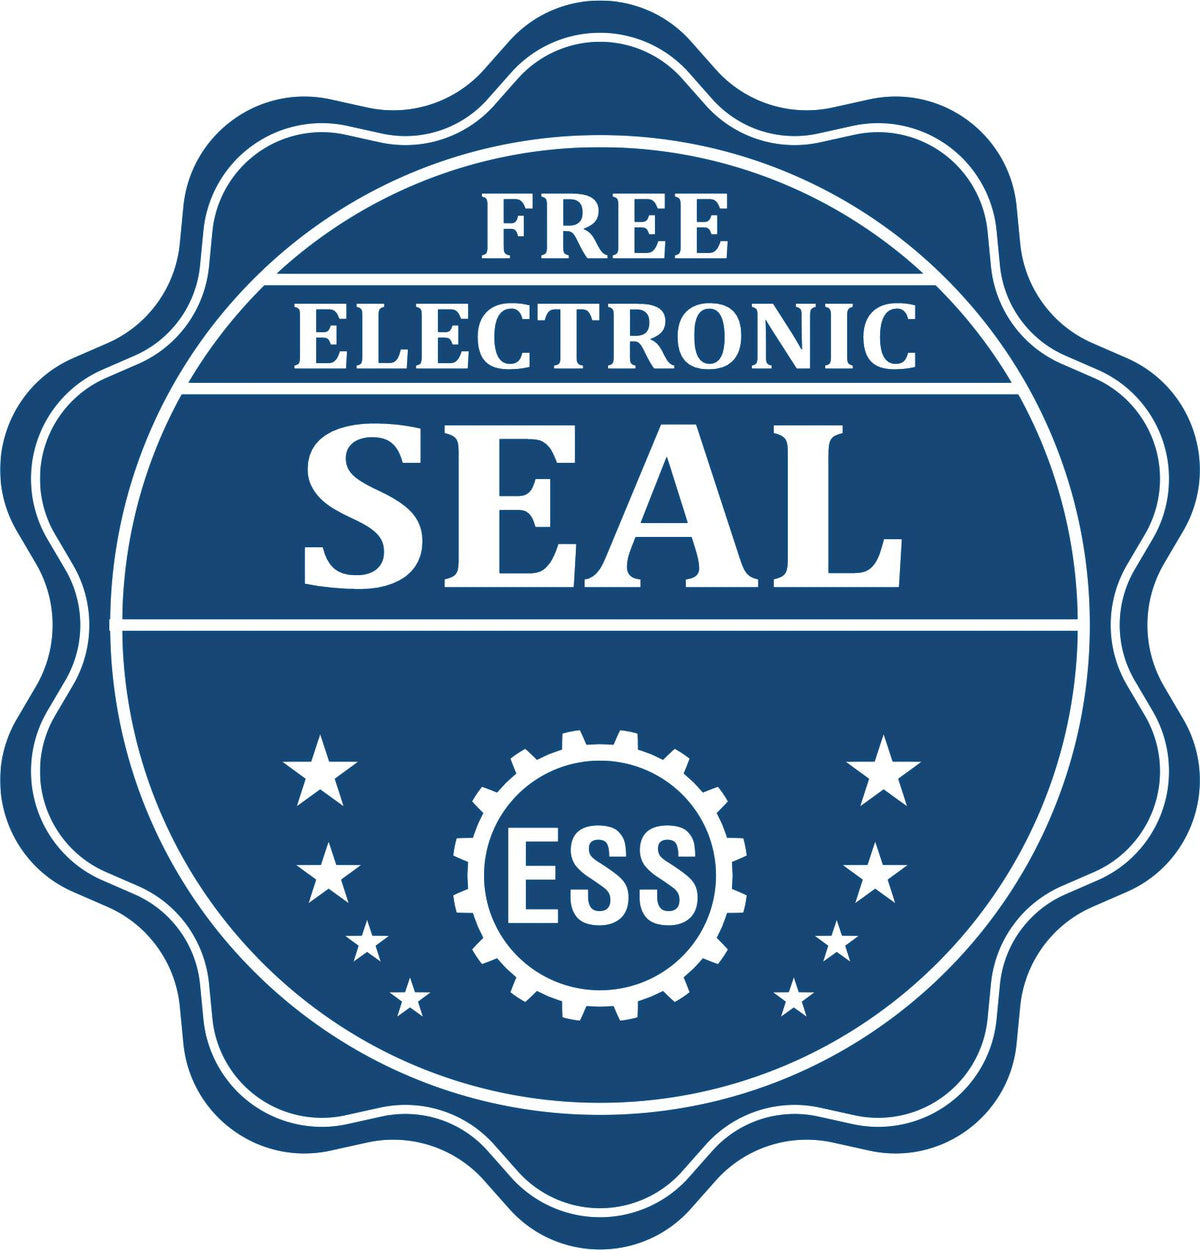 A badge showing a free electronic seal for the Heavy Duty Cast Iron Maine Geologist Seal Embosser with stars and the ESS gear on the emblem.